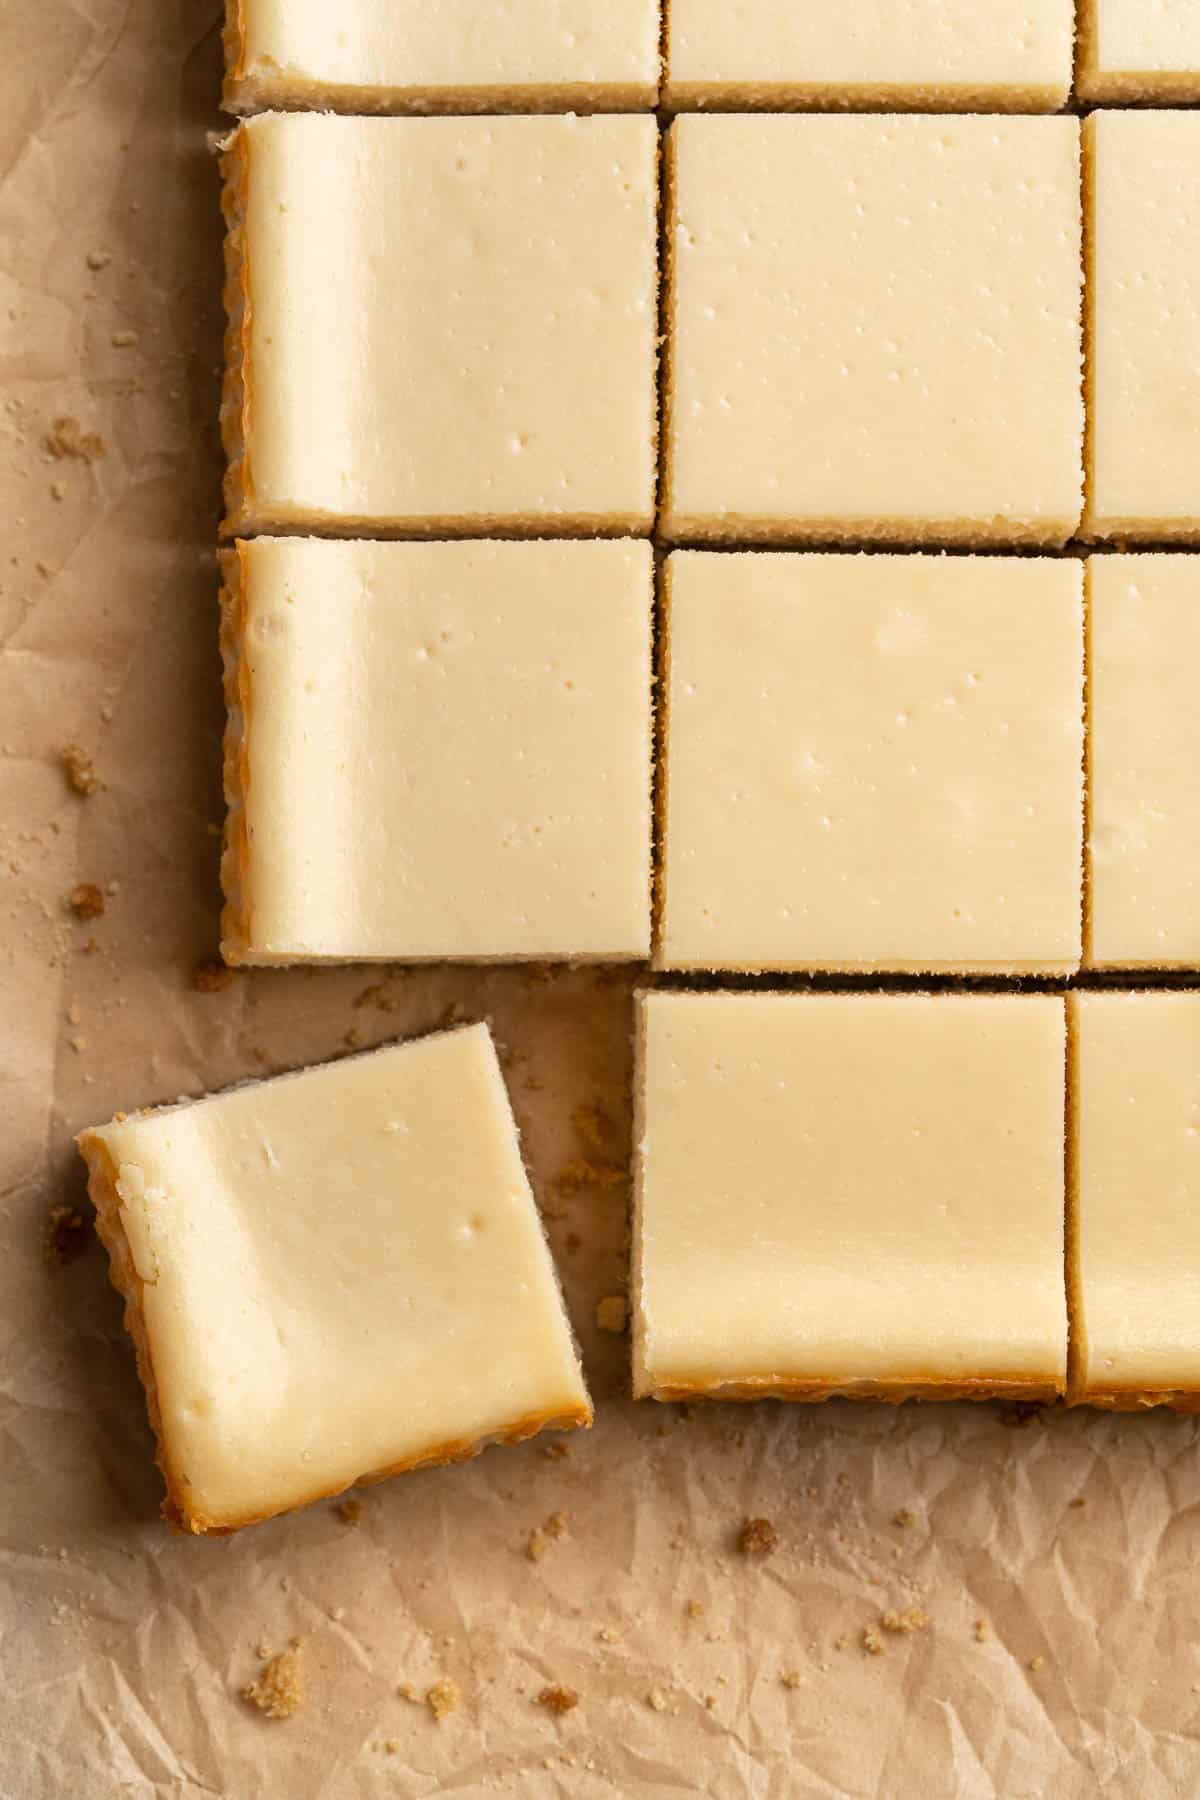 Cheesecake bars cut into squares on parchment paper.